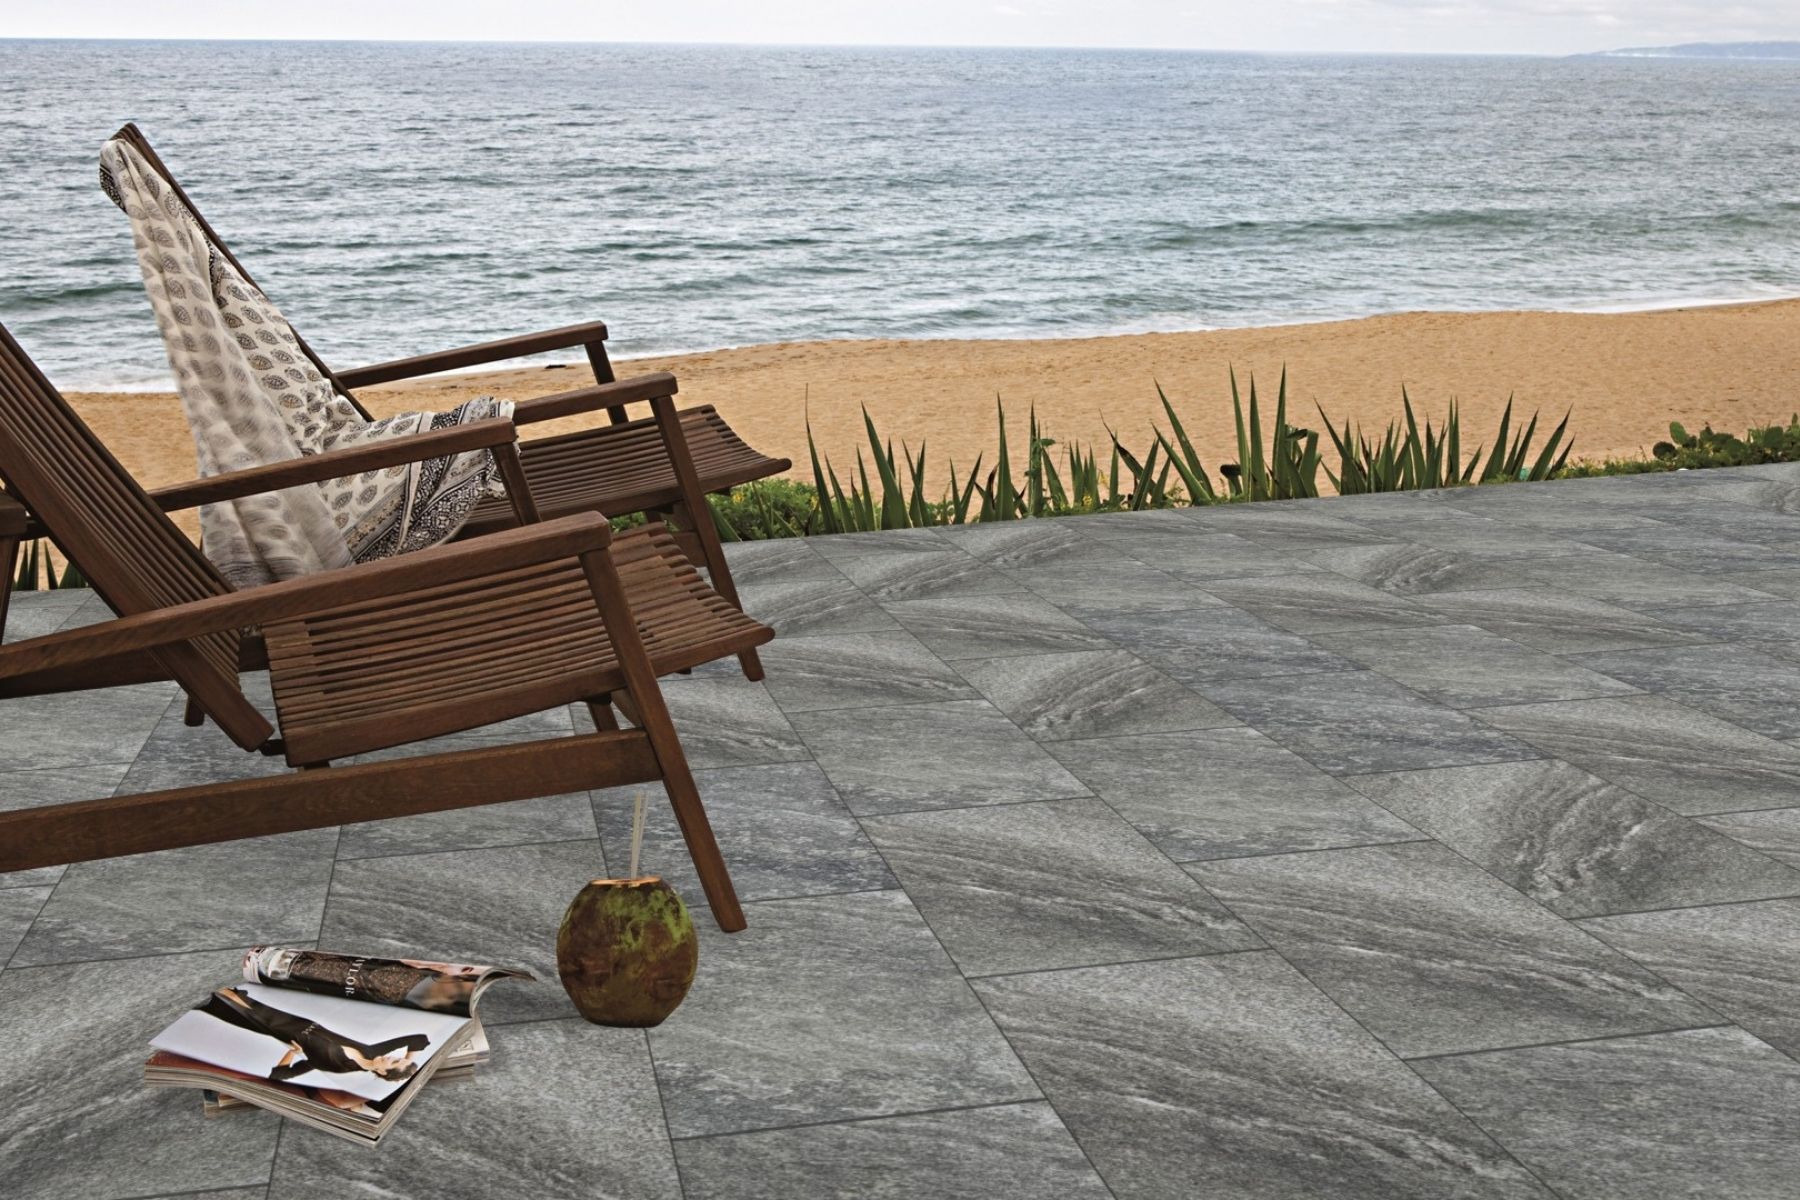 natural stone porcelain pavers used in outdoor open area by beach side home